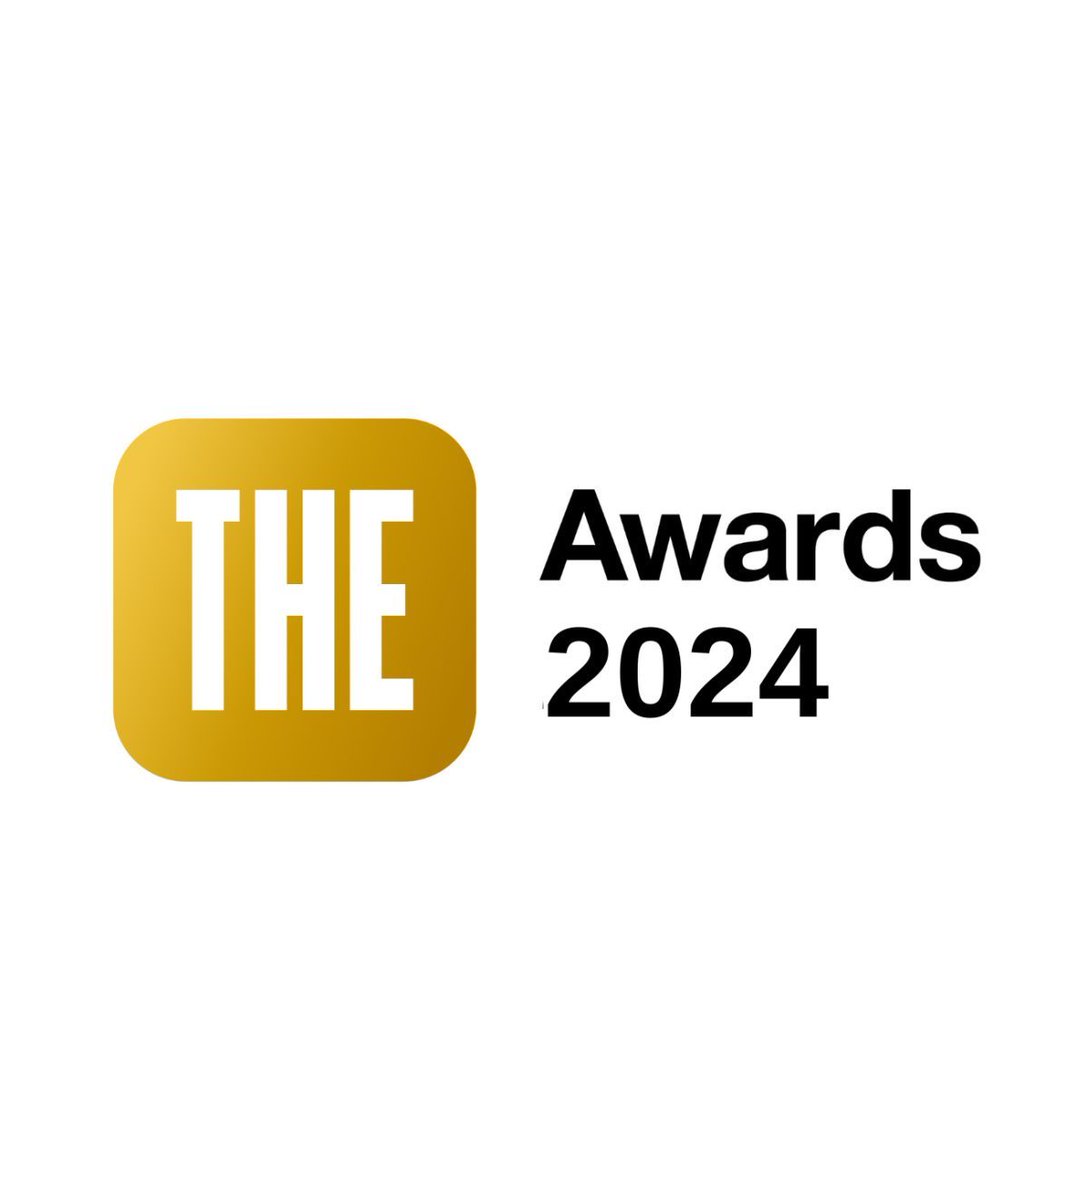 🏆 Nominations are now open for #THEAwards Outstanding Technician of the Year 2024, sponsored by @TechsCommit

📅 Submissions close 10 June 2024

➡️ buff.ly/3QllDLh